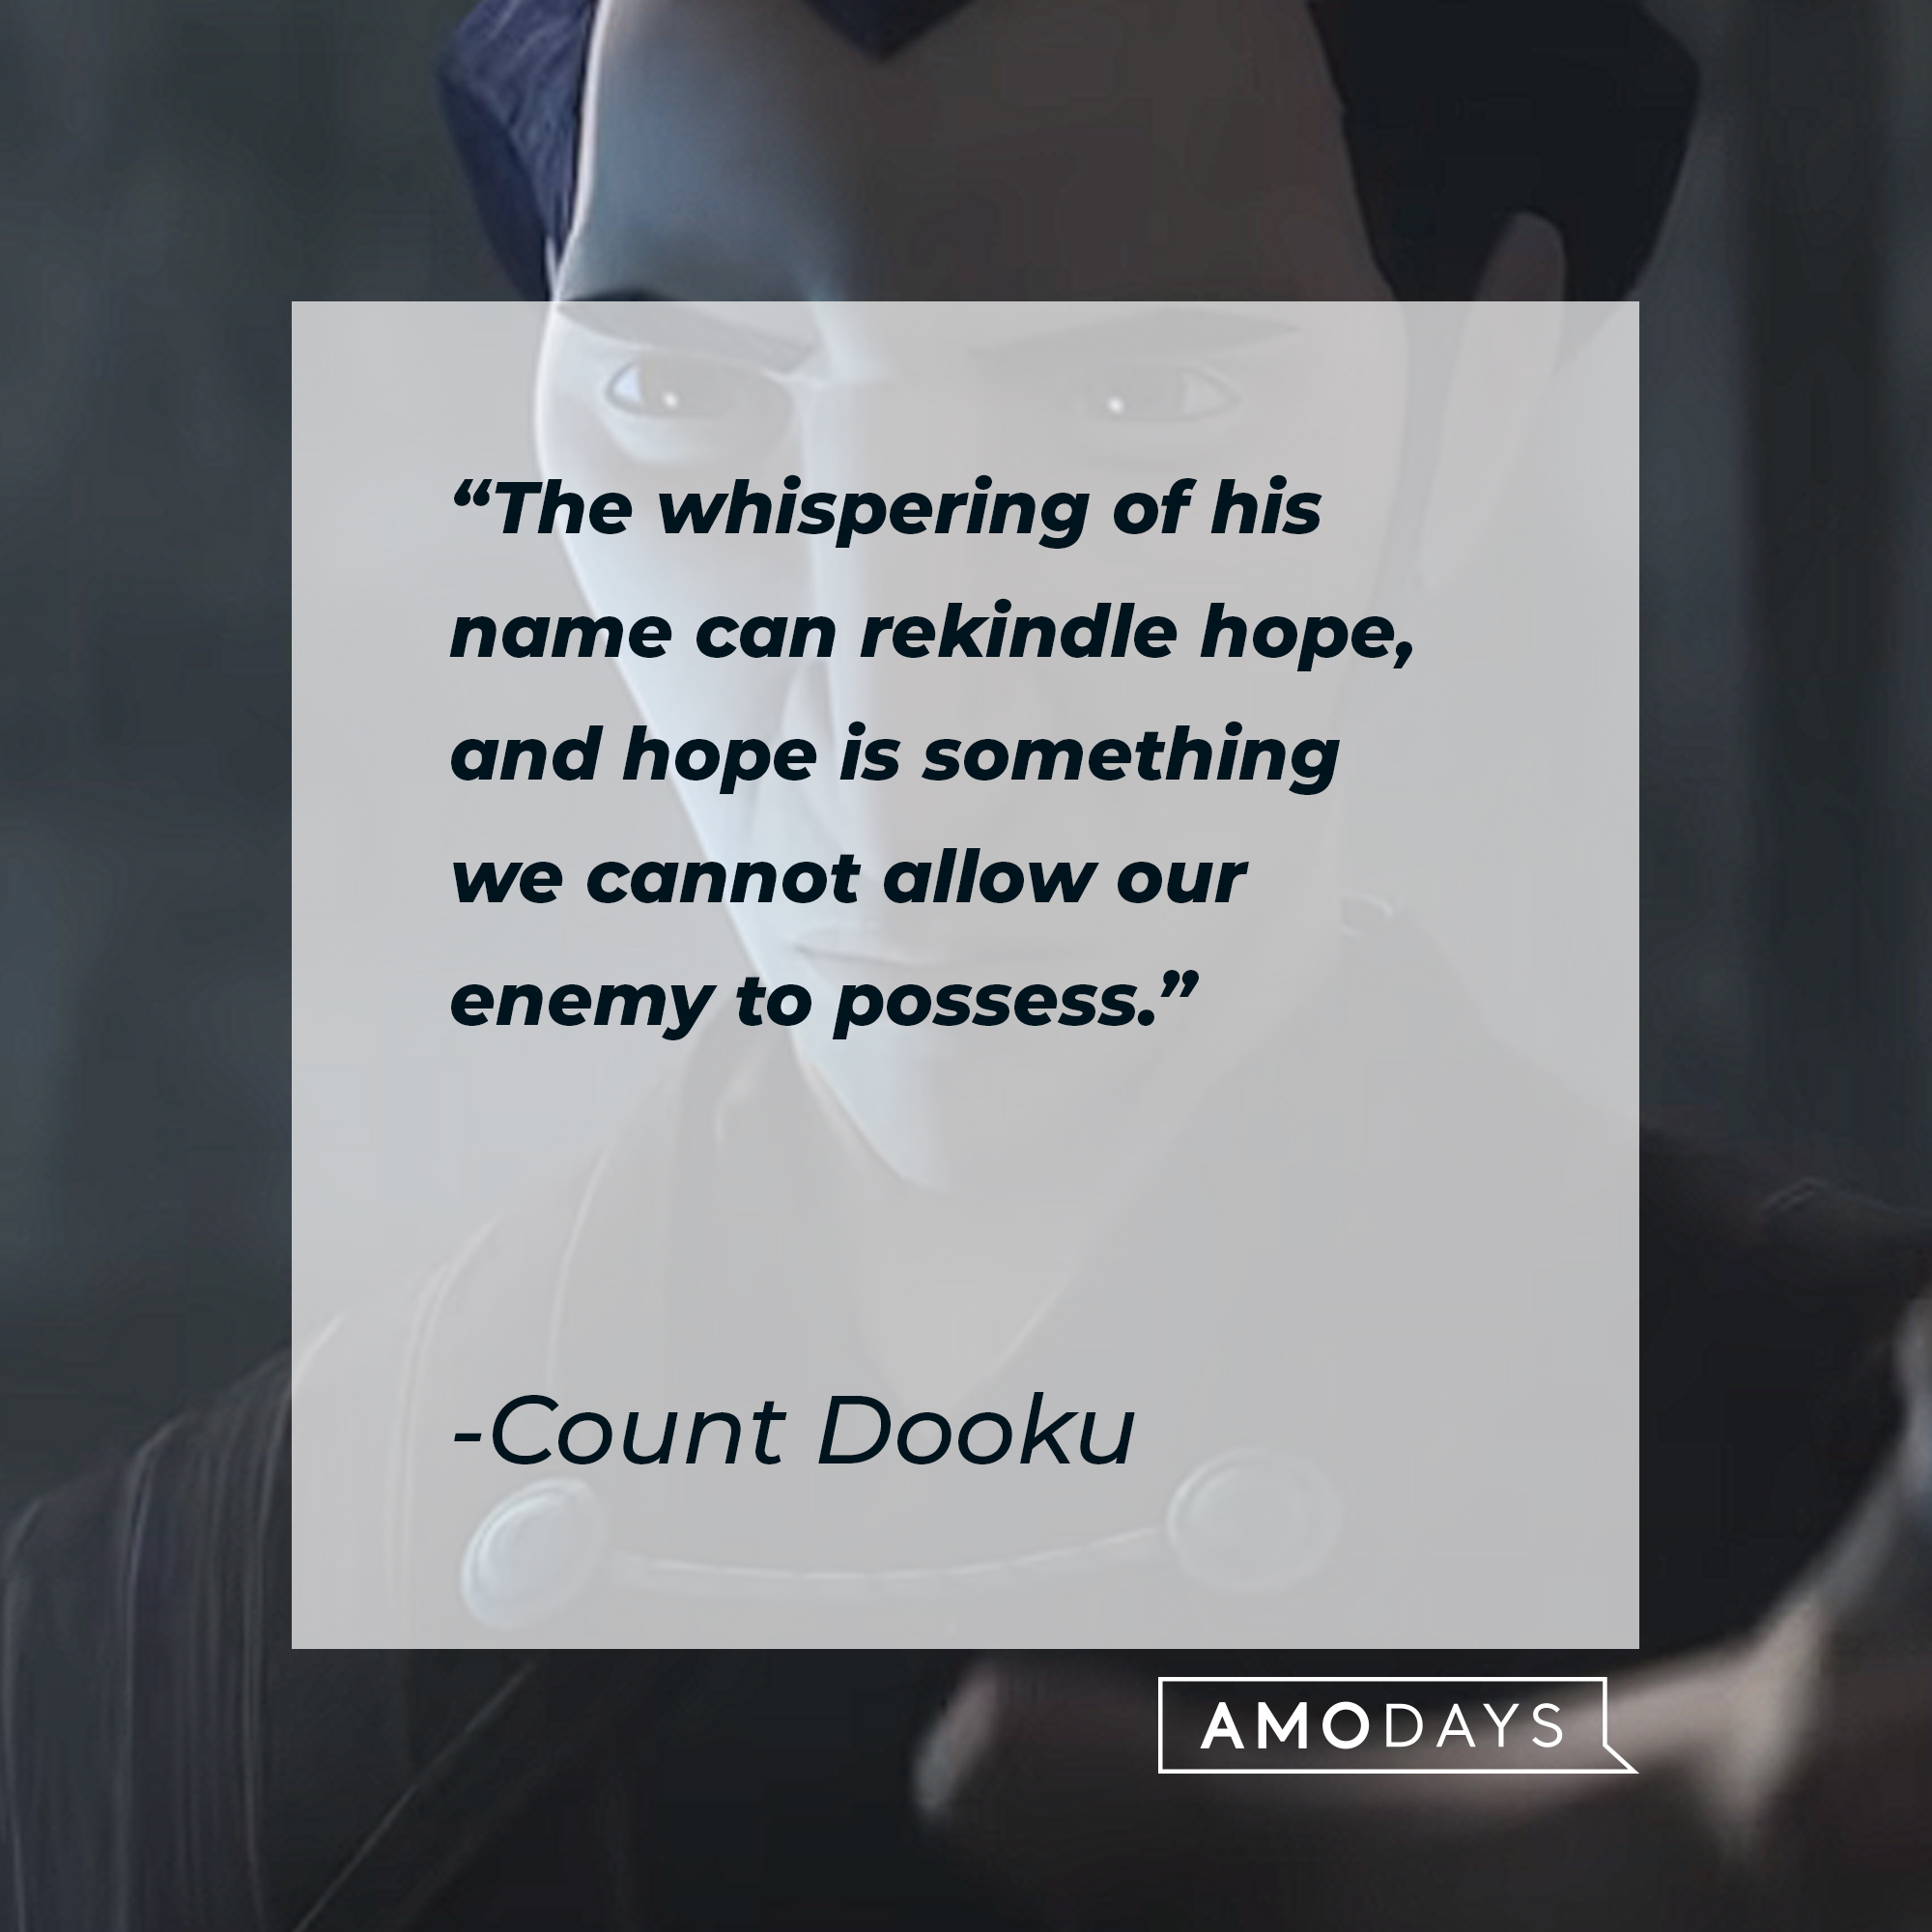 Count Dooku's quote: "The whispering of his name can rekindle hope, and hope is something we cannot allow our enemy to possess." | Source: youtube.com/StarWars